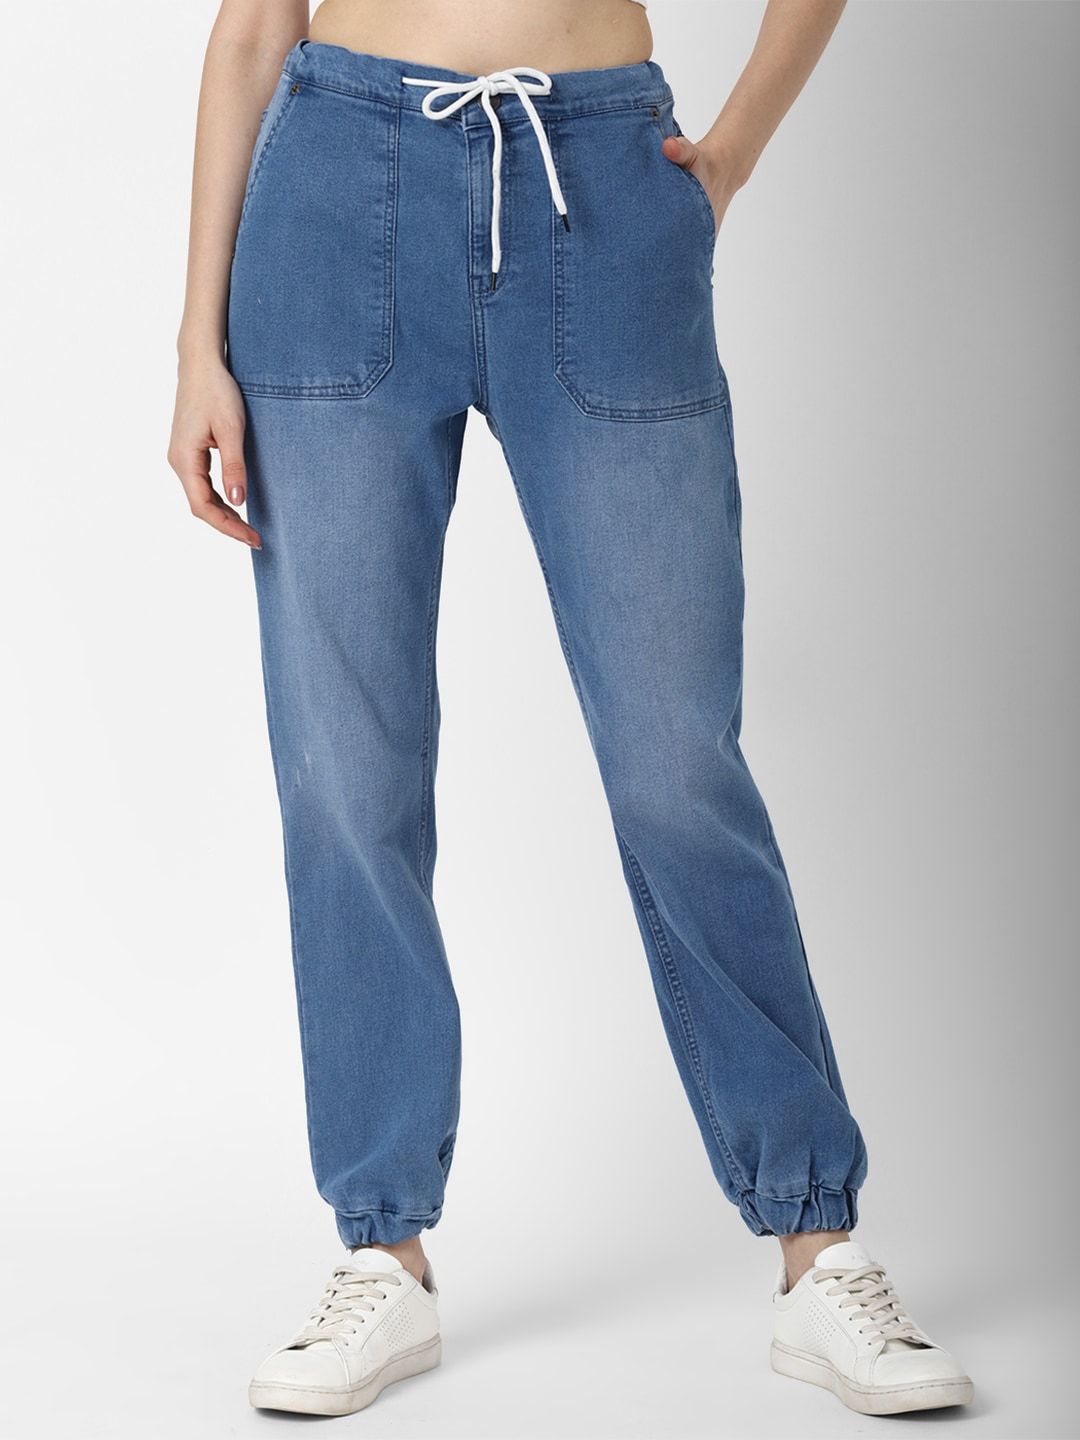 FOREVER 21 Women Blue Light Fade Jeans Price in India